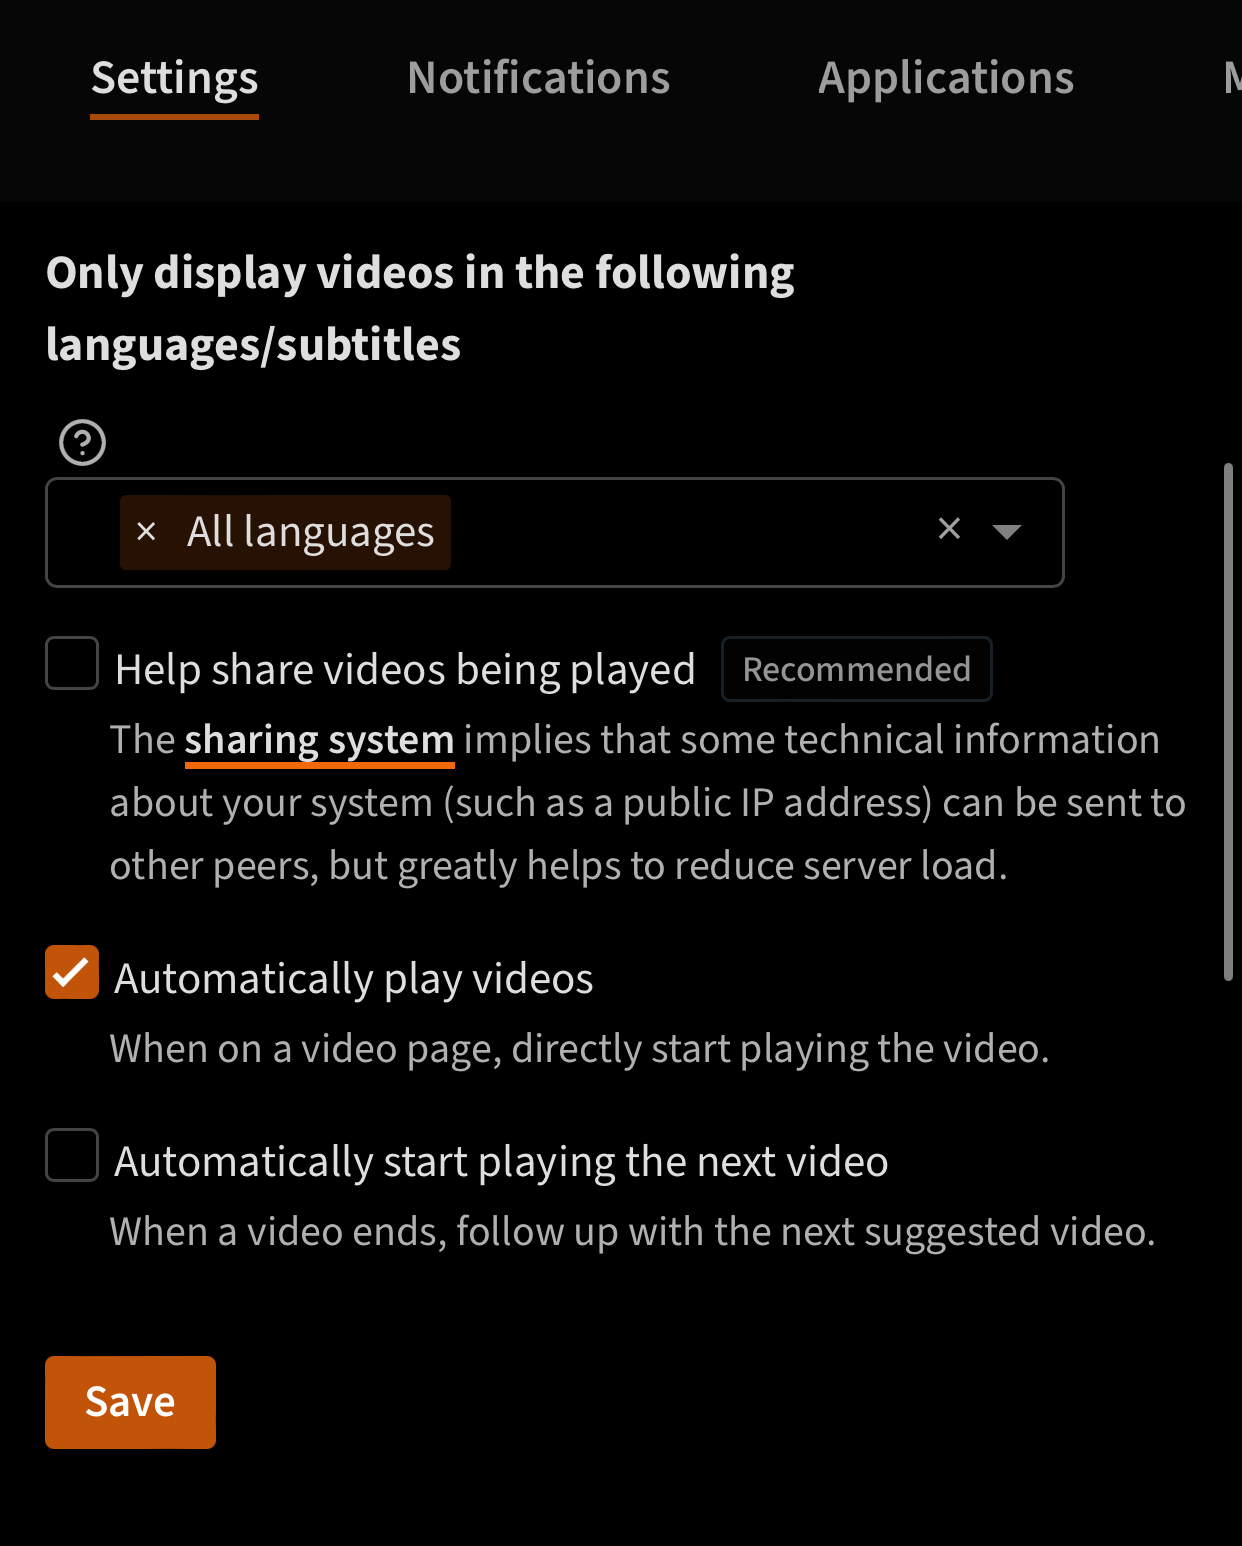 It seems that each user can disable it on settings